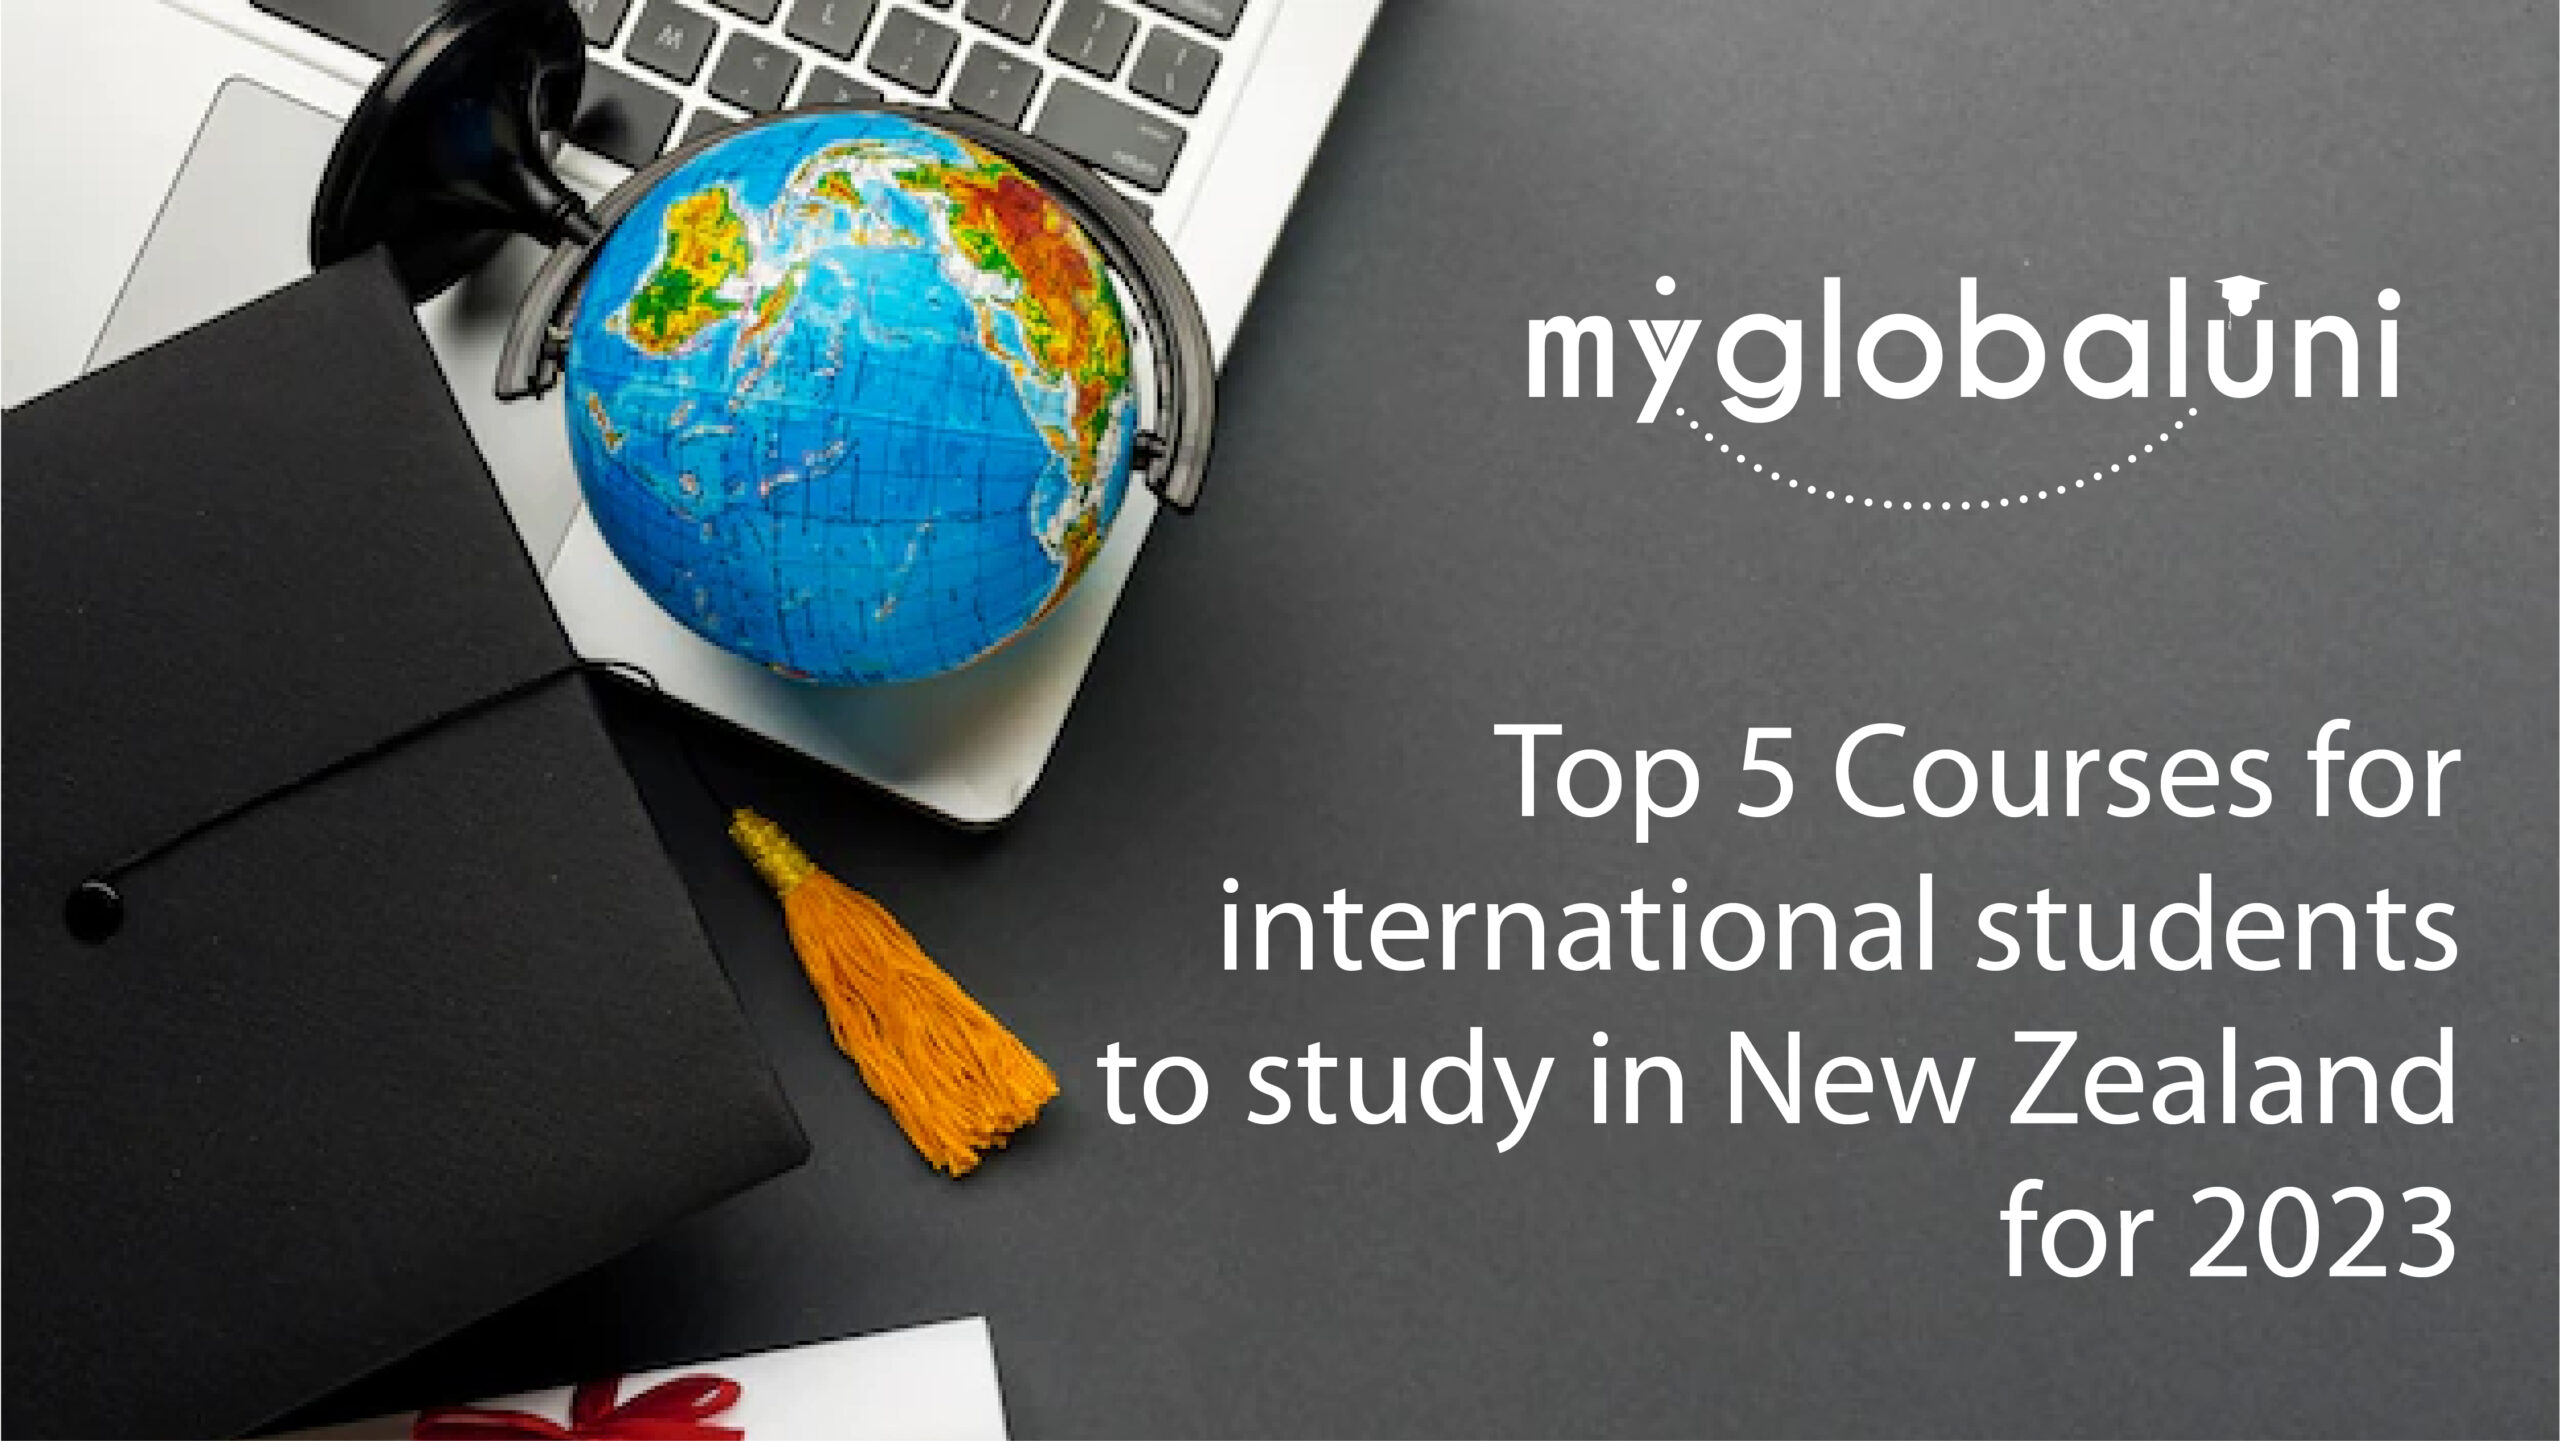 Top 5 Courses for international students to study in New Zealand for 2023